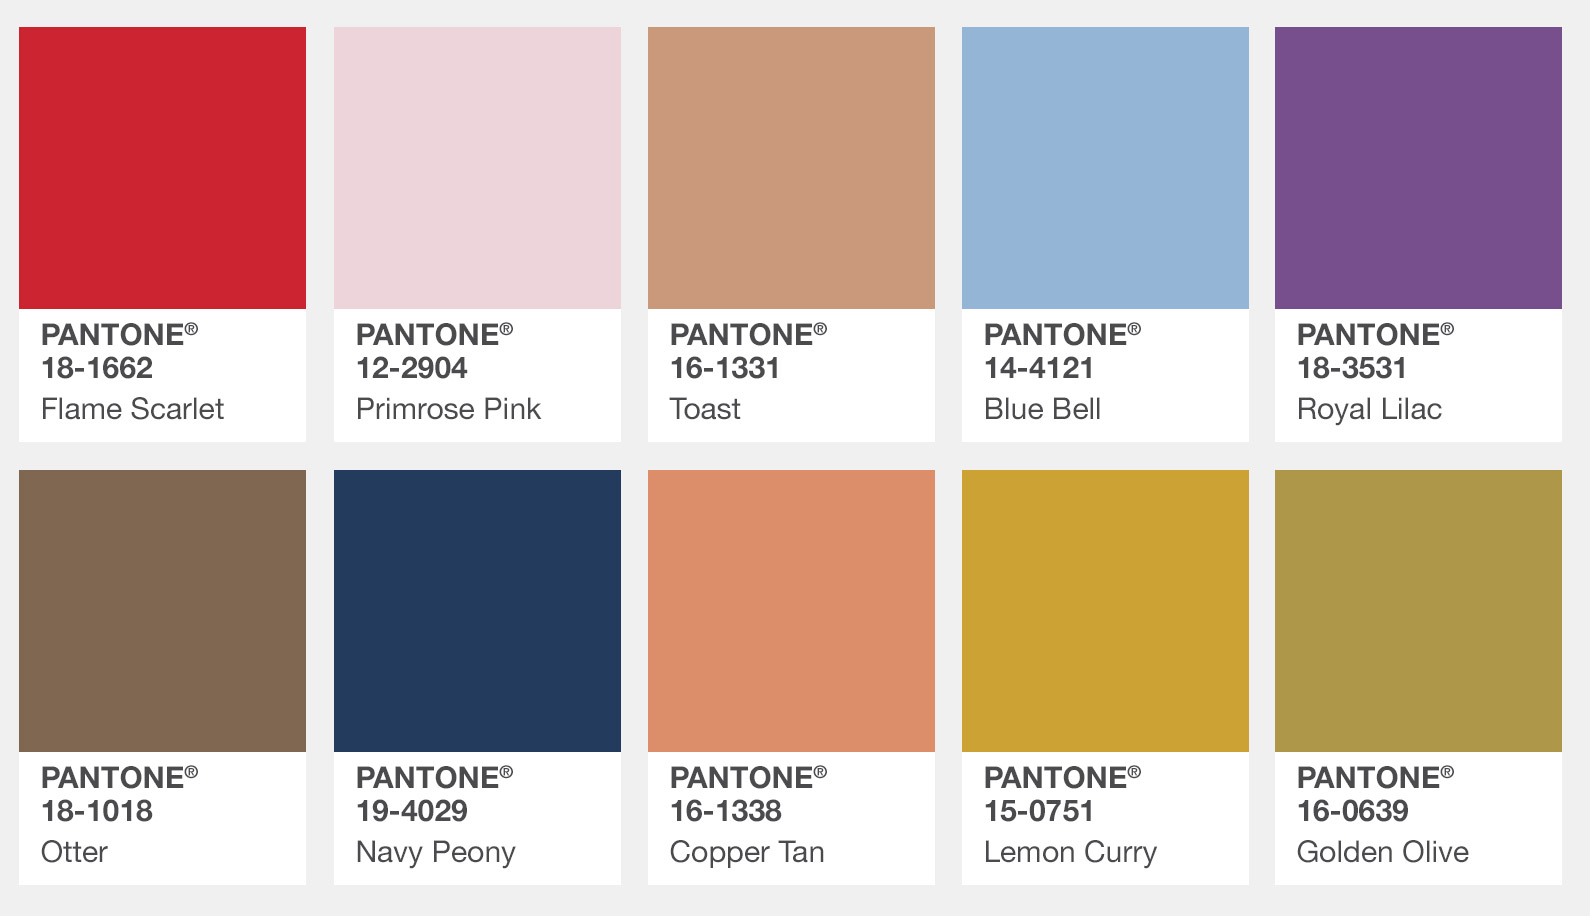 Pantone Colour Swatches - Fall 2017 London